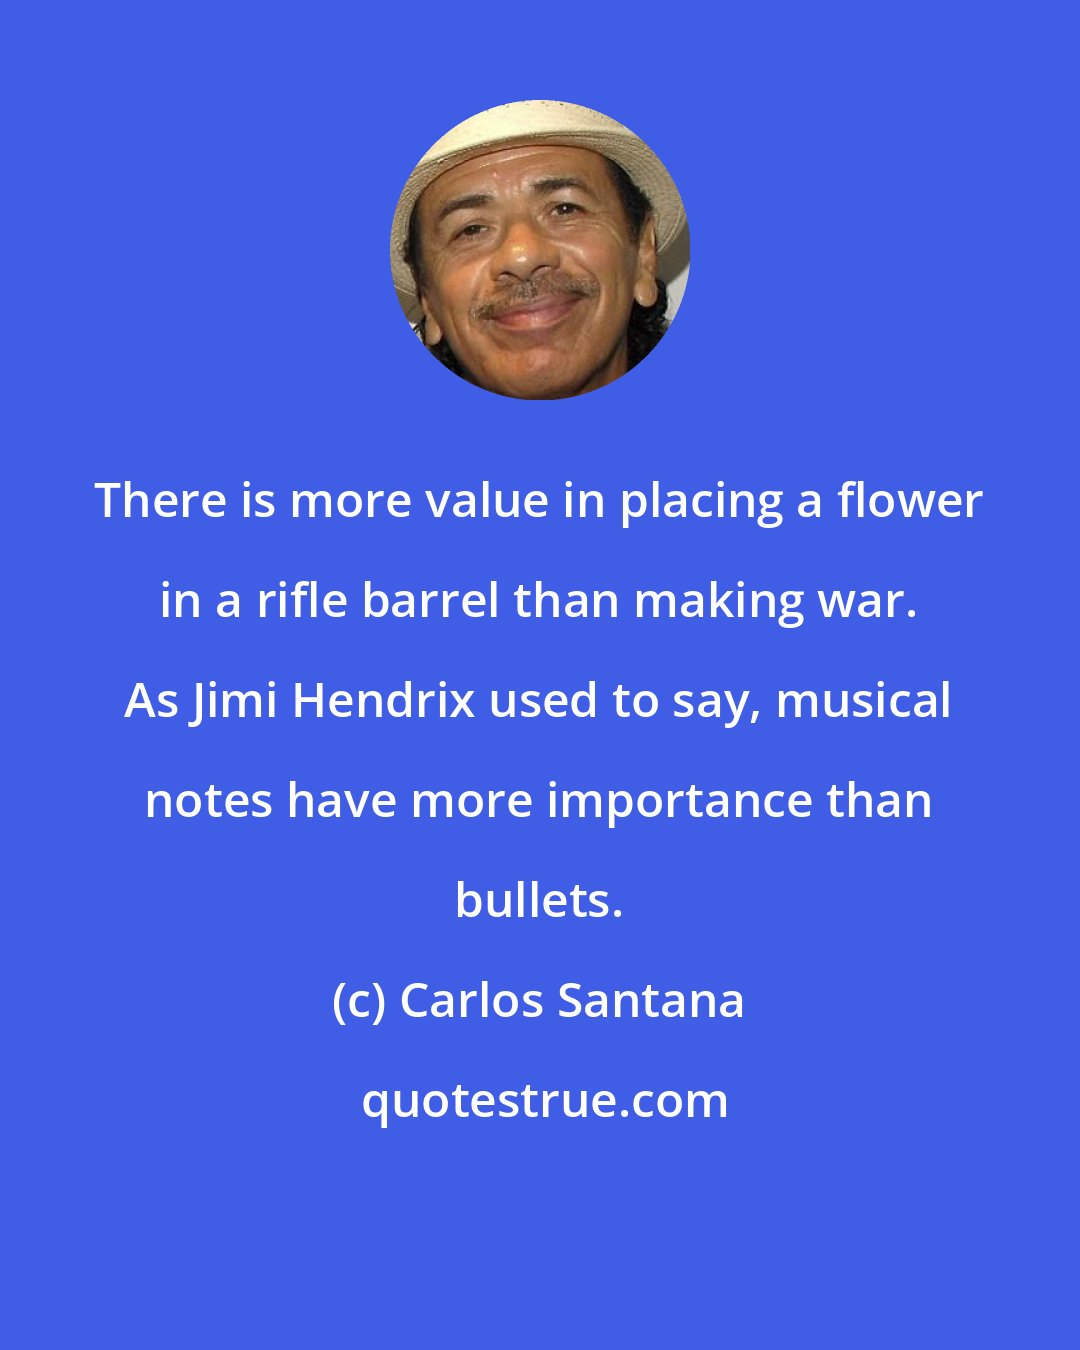 Carlos Santana: There is more value in placing a flower in a rifle barrel than making war. As Jimi Hendrix used to say, musical notes have more importance than bullets.